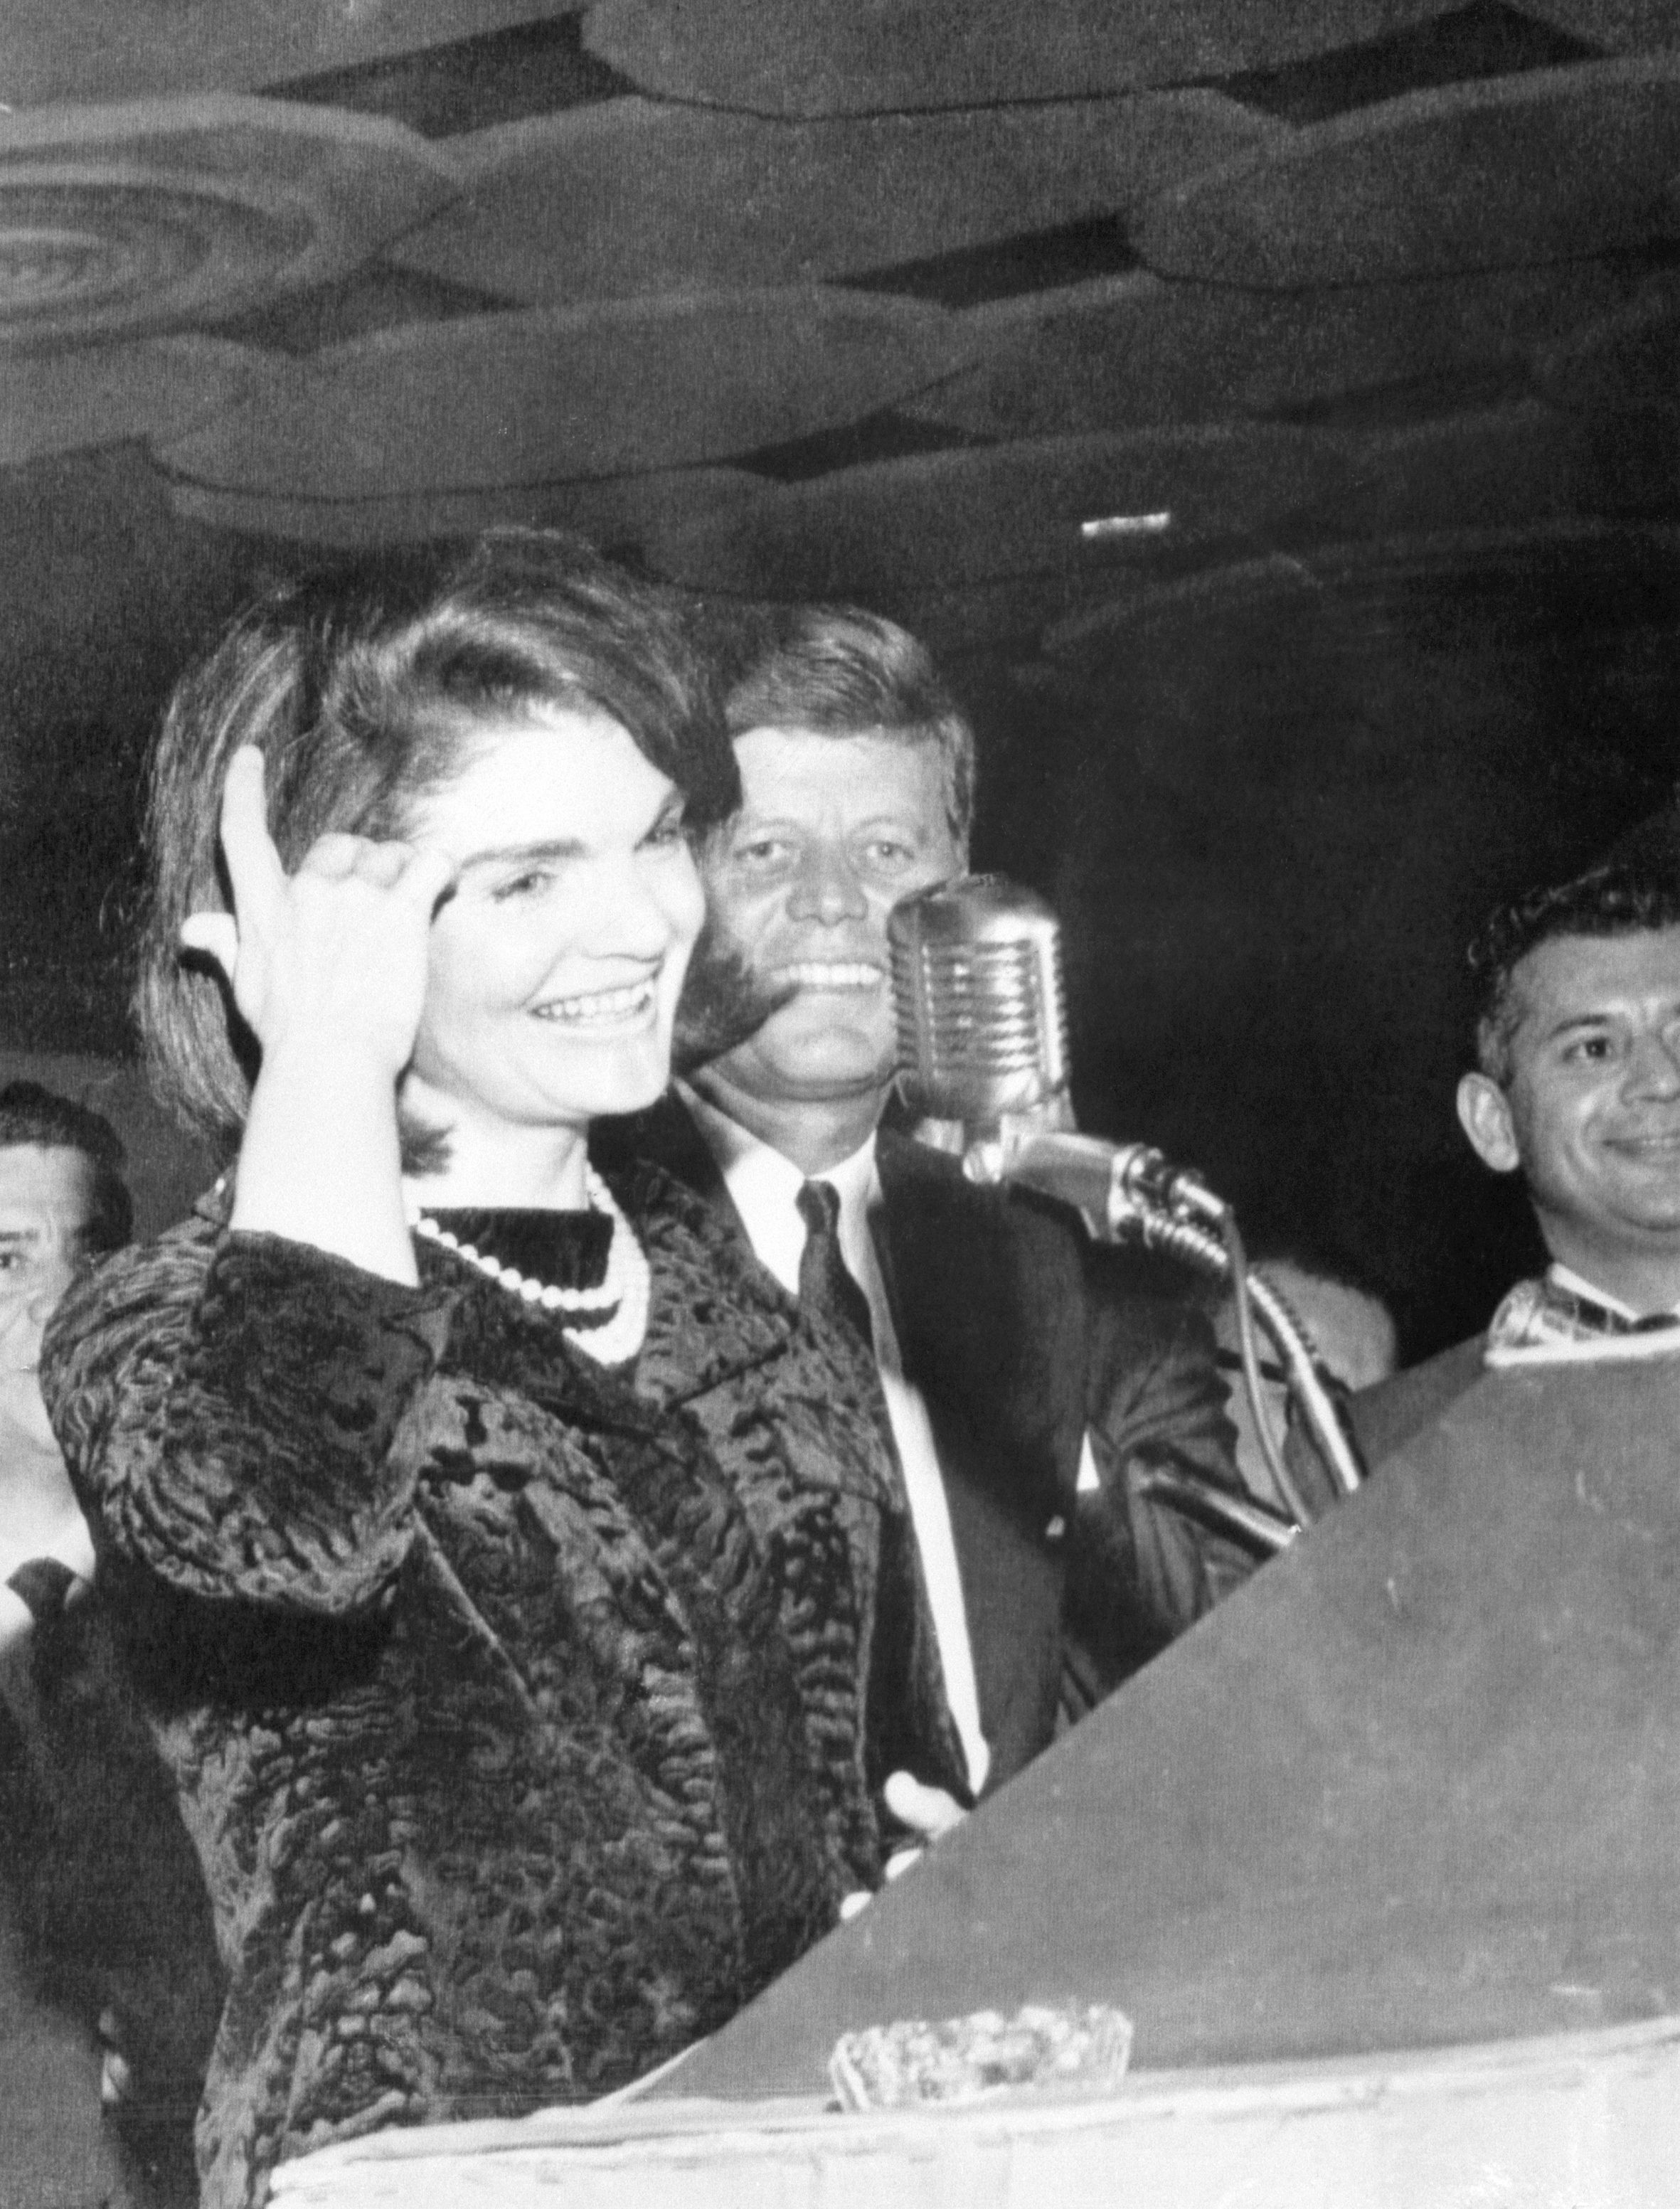 First Lady Jackie Kennedy smiles at the crowd in Houston as the president stands beside her on November 21, 1963. Mrs. Kennedy amused the audience of Mexican American civil rights leaders with the League of United Latin American Citizens, by speaking Spanish. The next day the president will be killed in Dallas. 